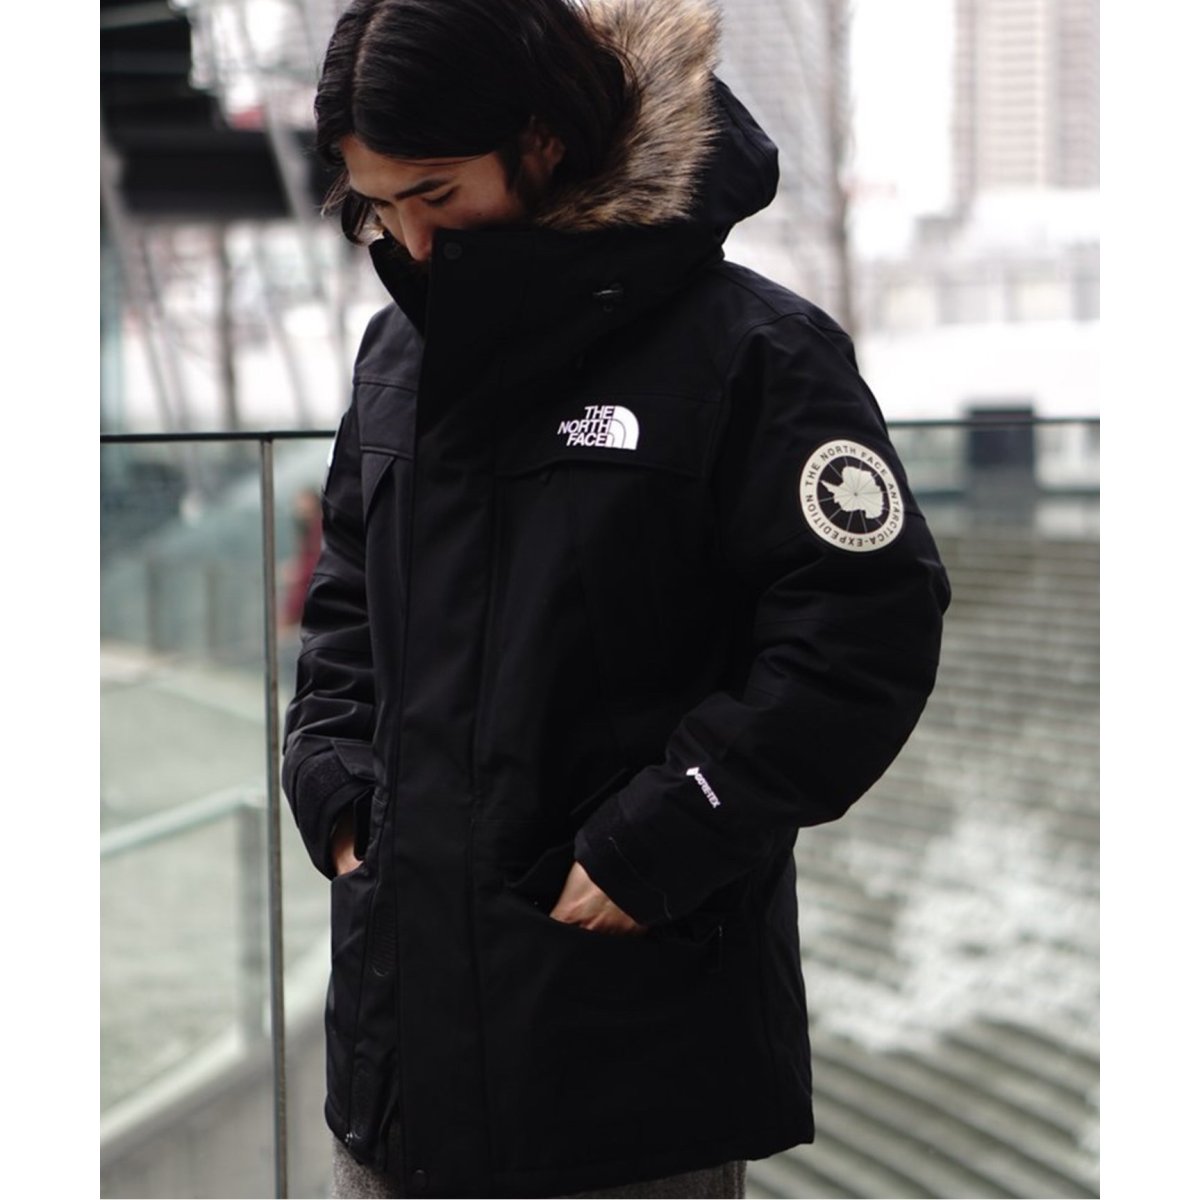 THE NORTH FACE Antarctica Parka size S自身も169センチです